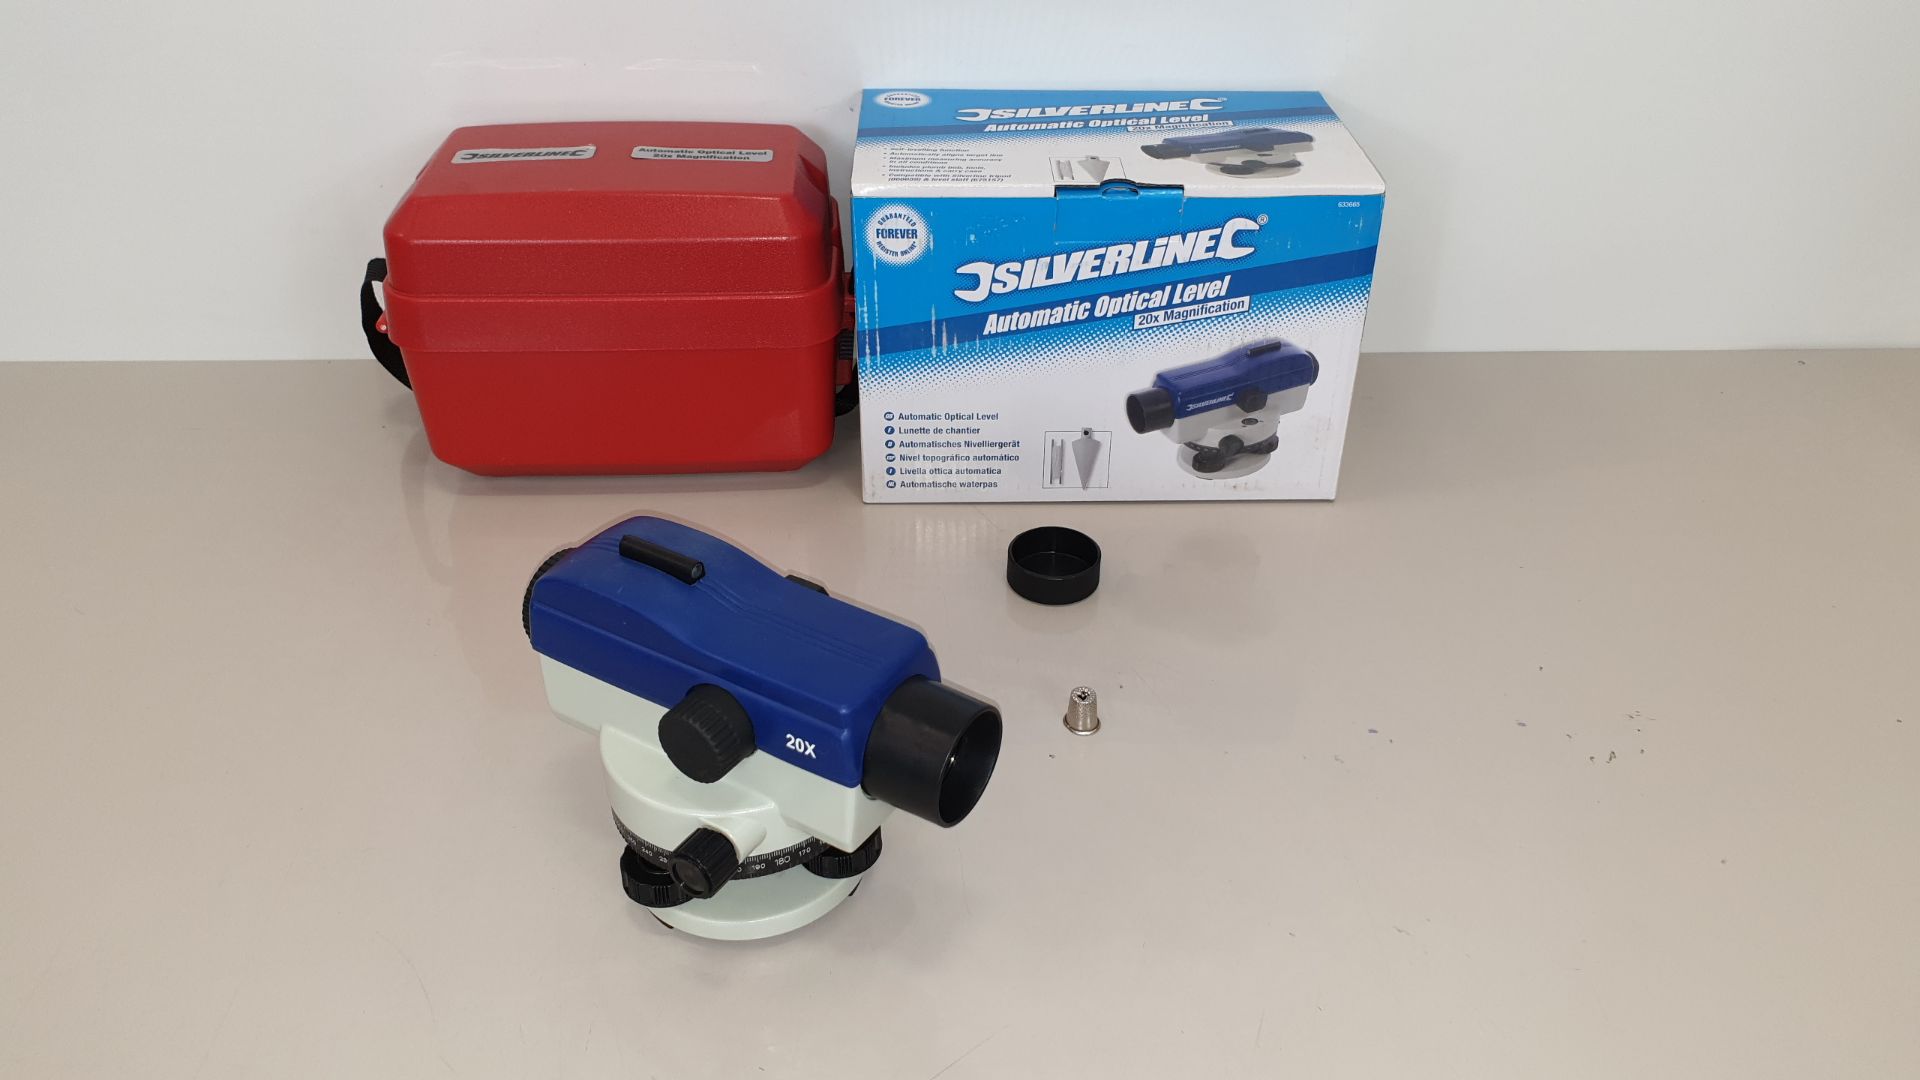 BRAND NEW SILVERLINE AUTOMATIC OPTICAL LEVEL - 20X MAGNIFICATION , SELF LEVELLING FUNCTION,